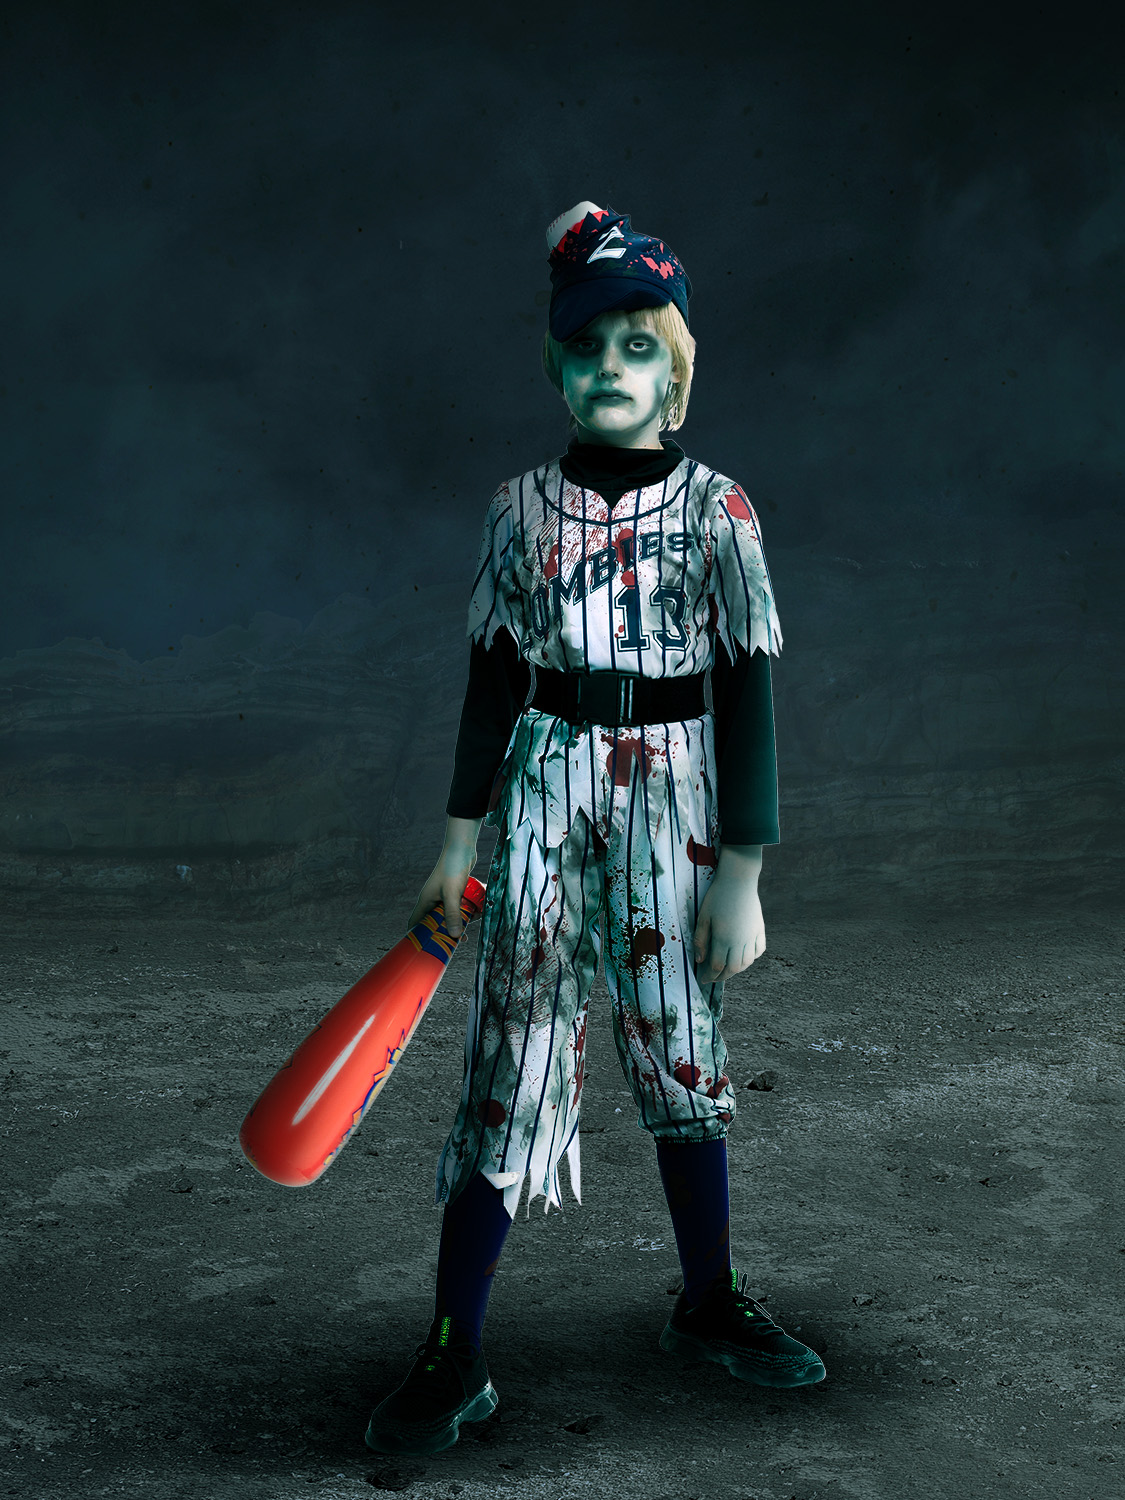 You are currently viewing Creepy Halloween Costumes That Will Terrify People